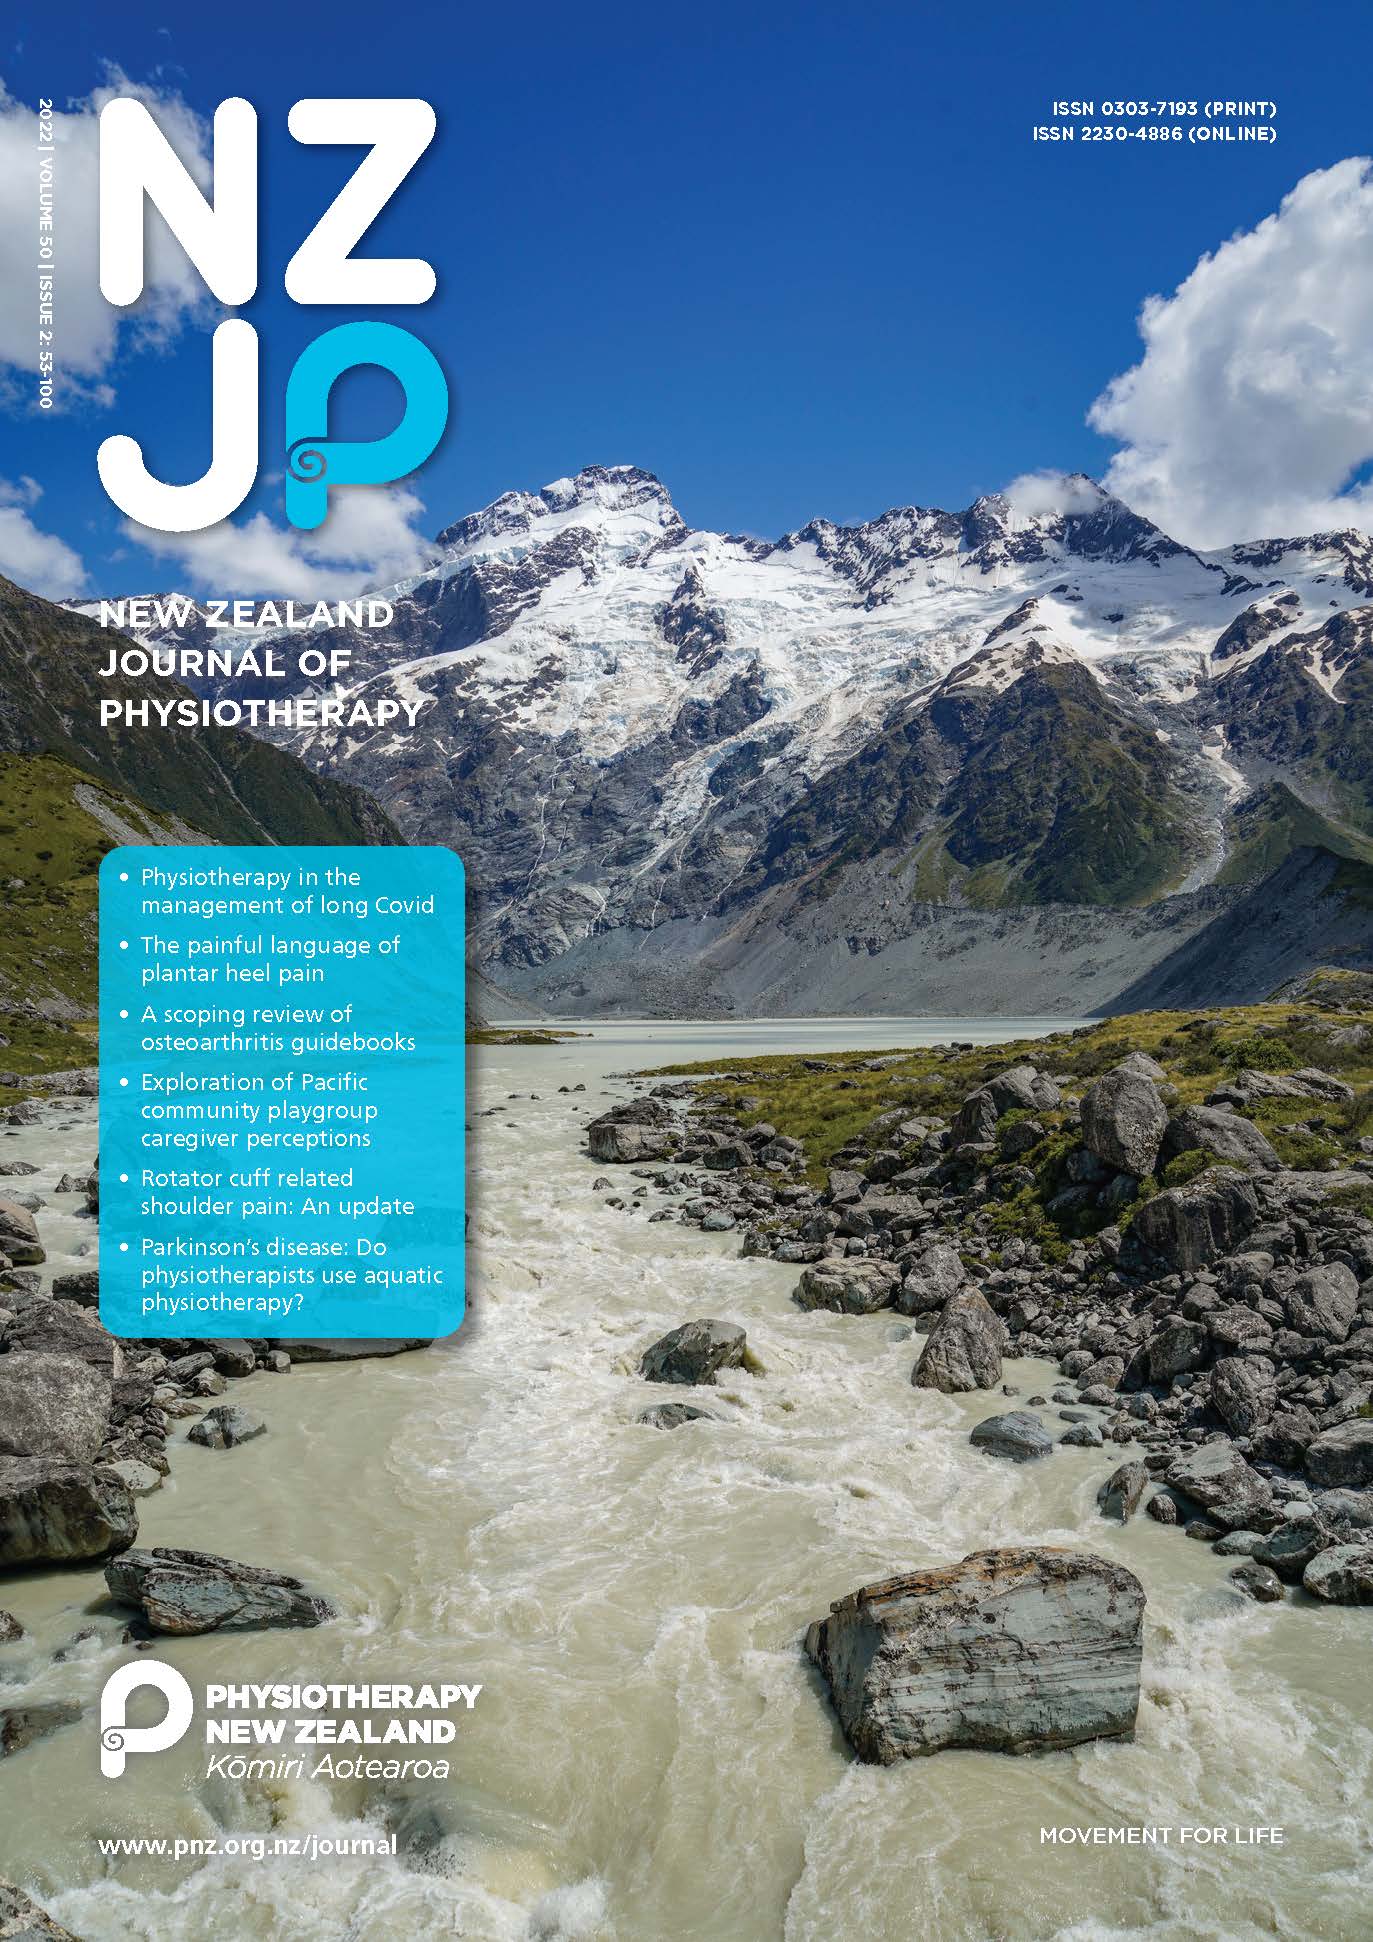 					View Vol. 50 No. 2 (2022): New Zealand Journal of Physiotherapy
				